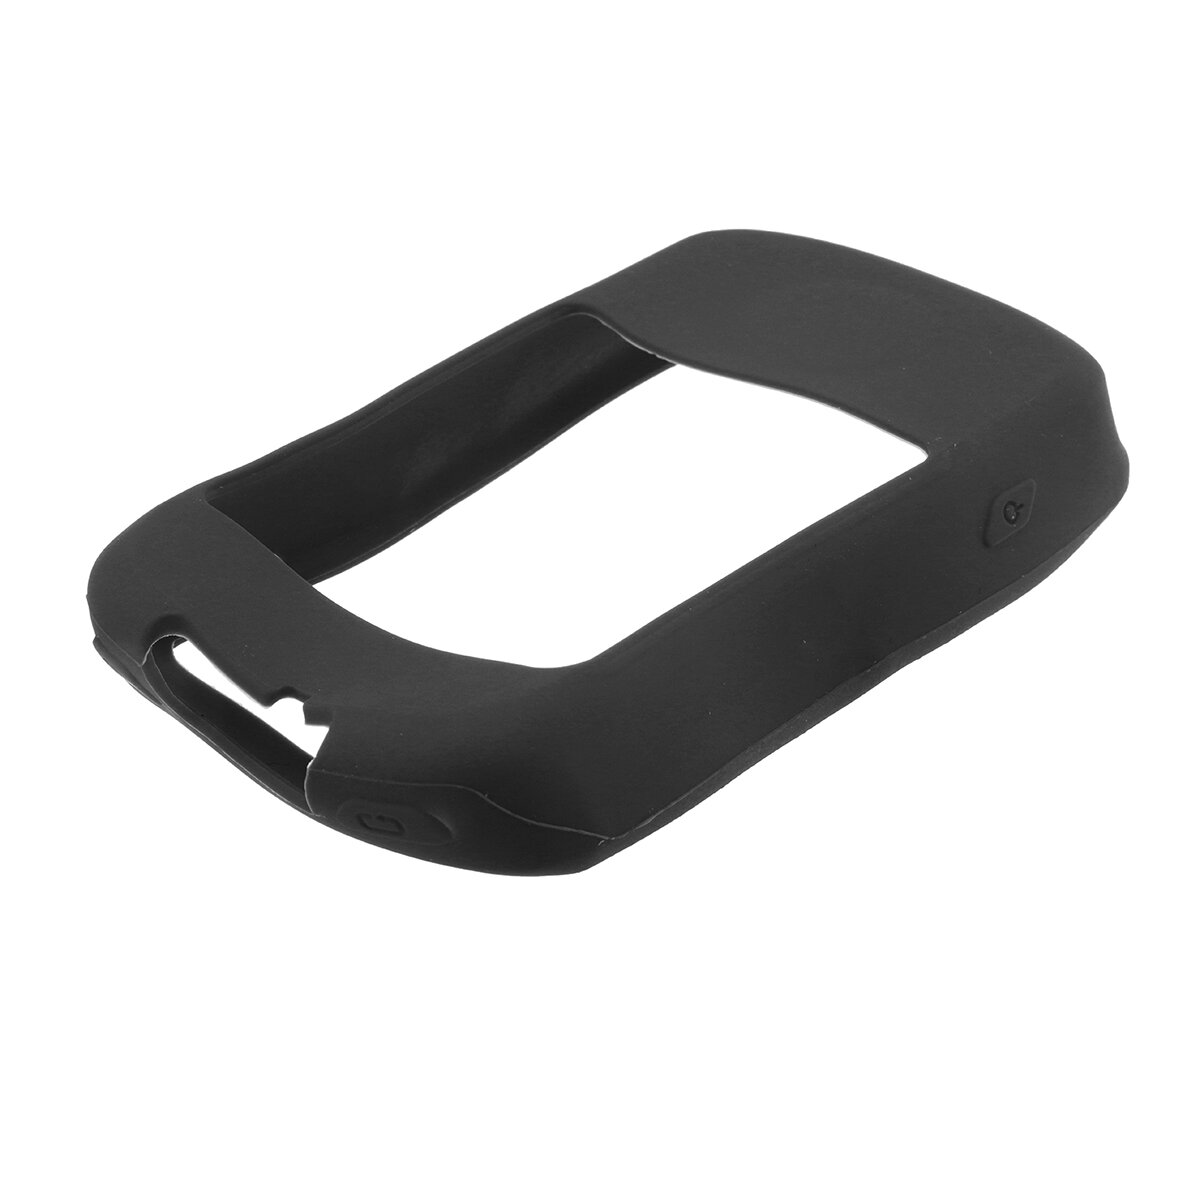 BIKIGHT Bike Bicycle Cycling Computer Cover Waterproof Silicone Case GPS Devices Protector Cover Garmin Edge 1030 COD